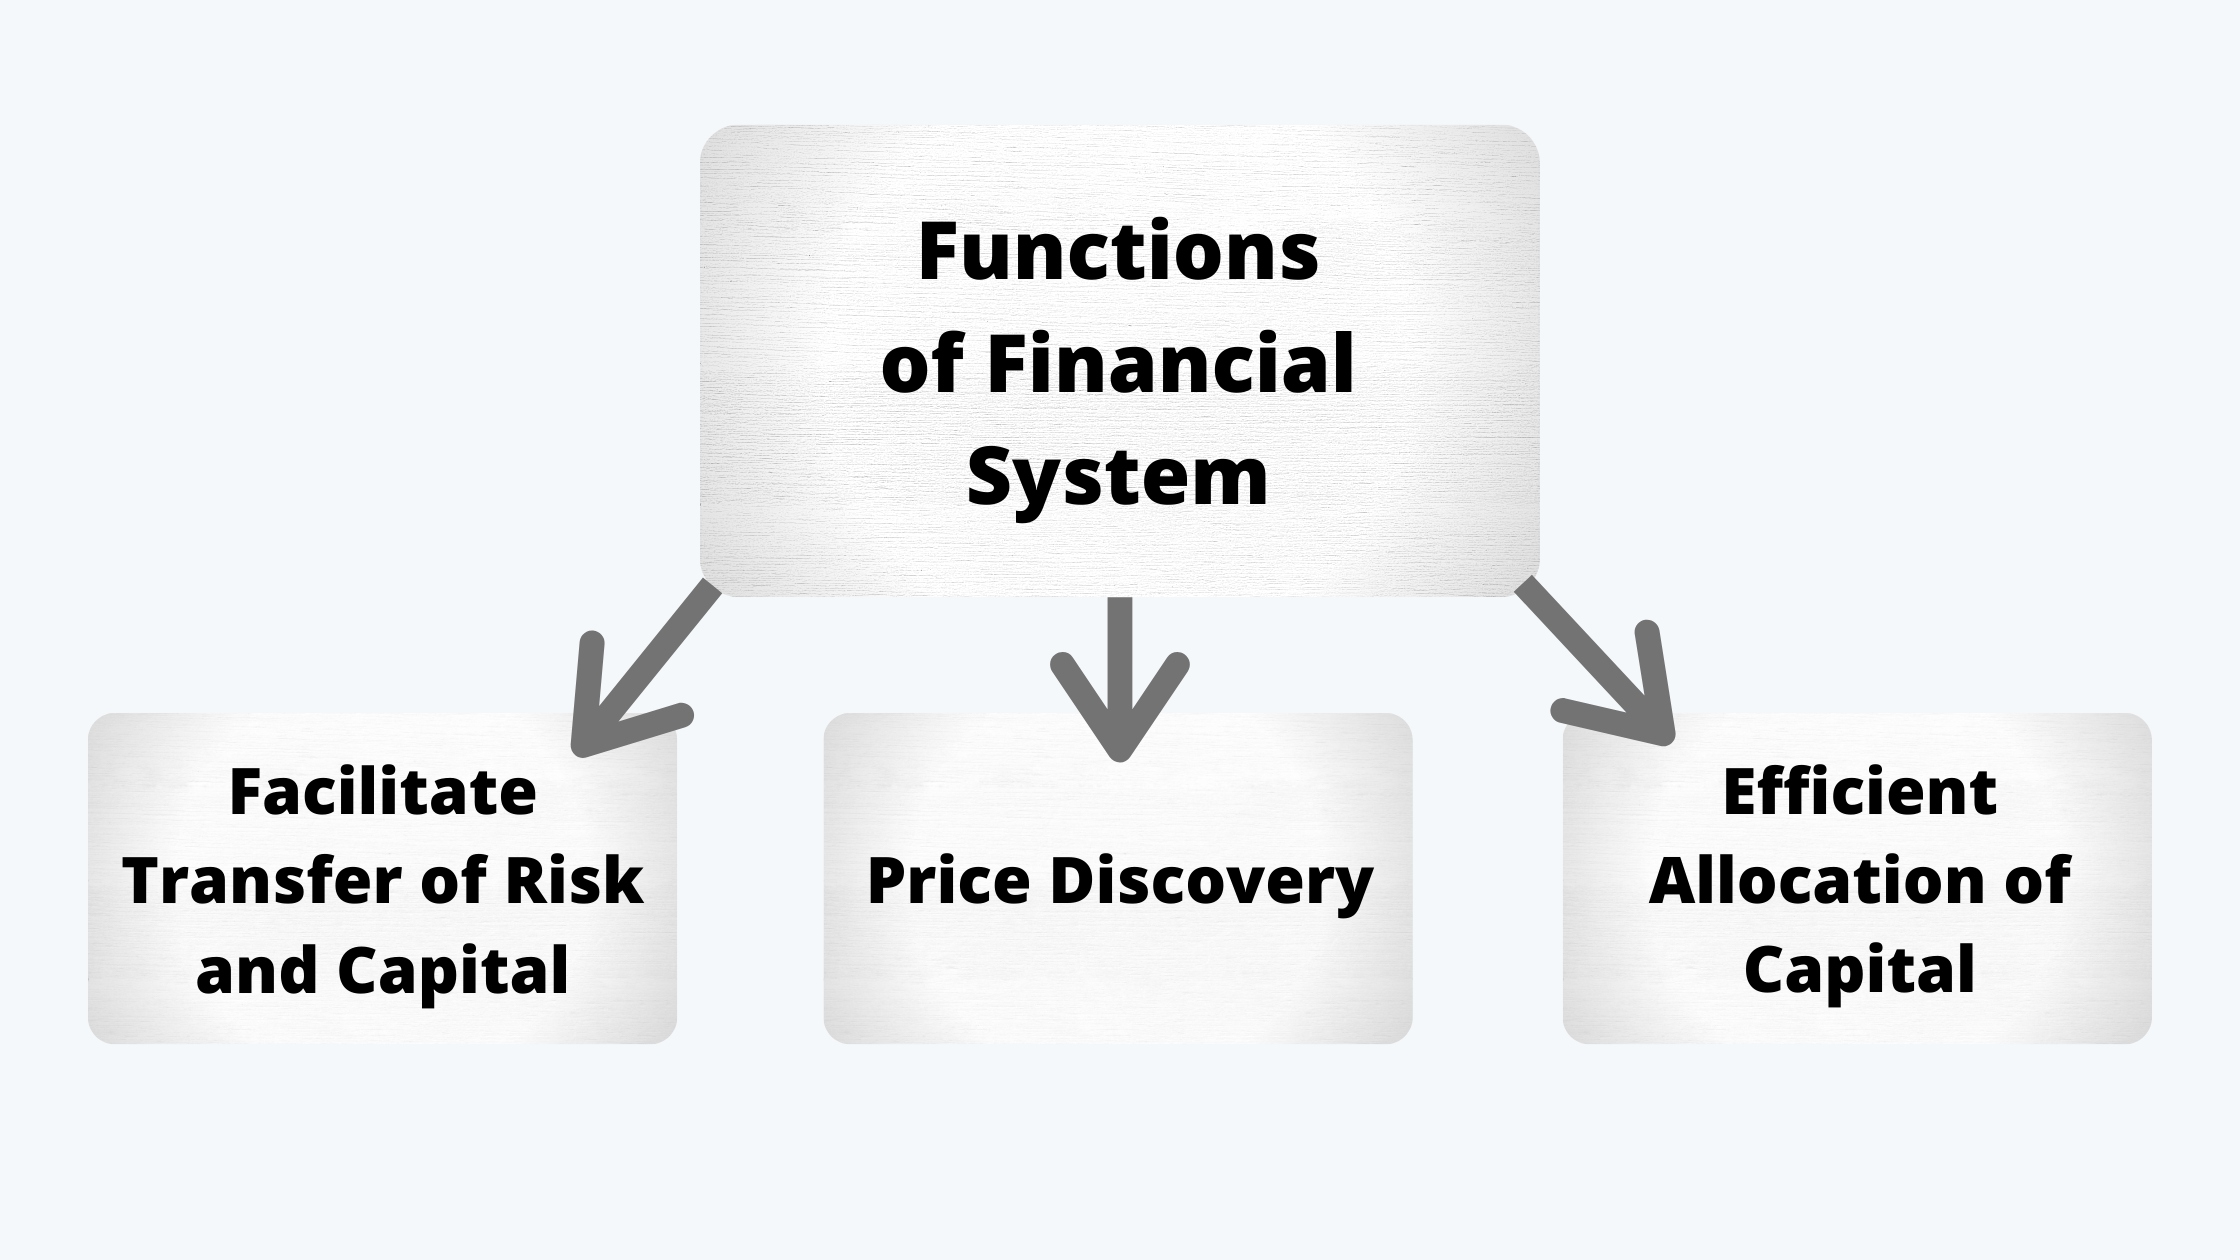 Functions of Financial System Equity Investment CFA Level 1 Study Notes